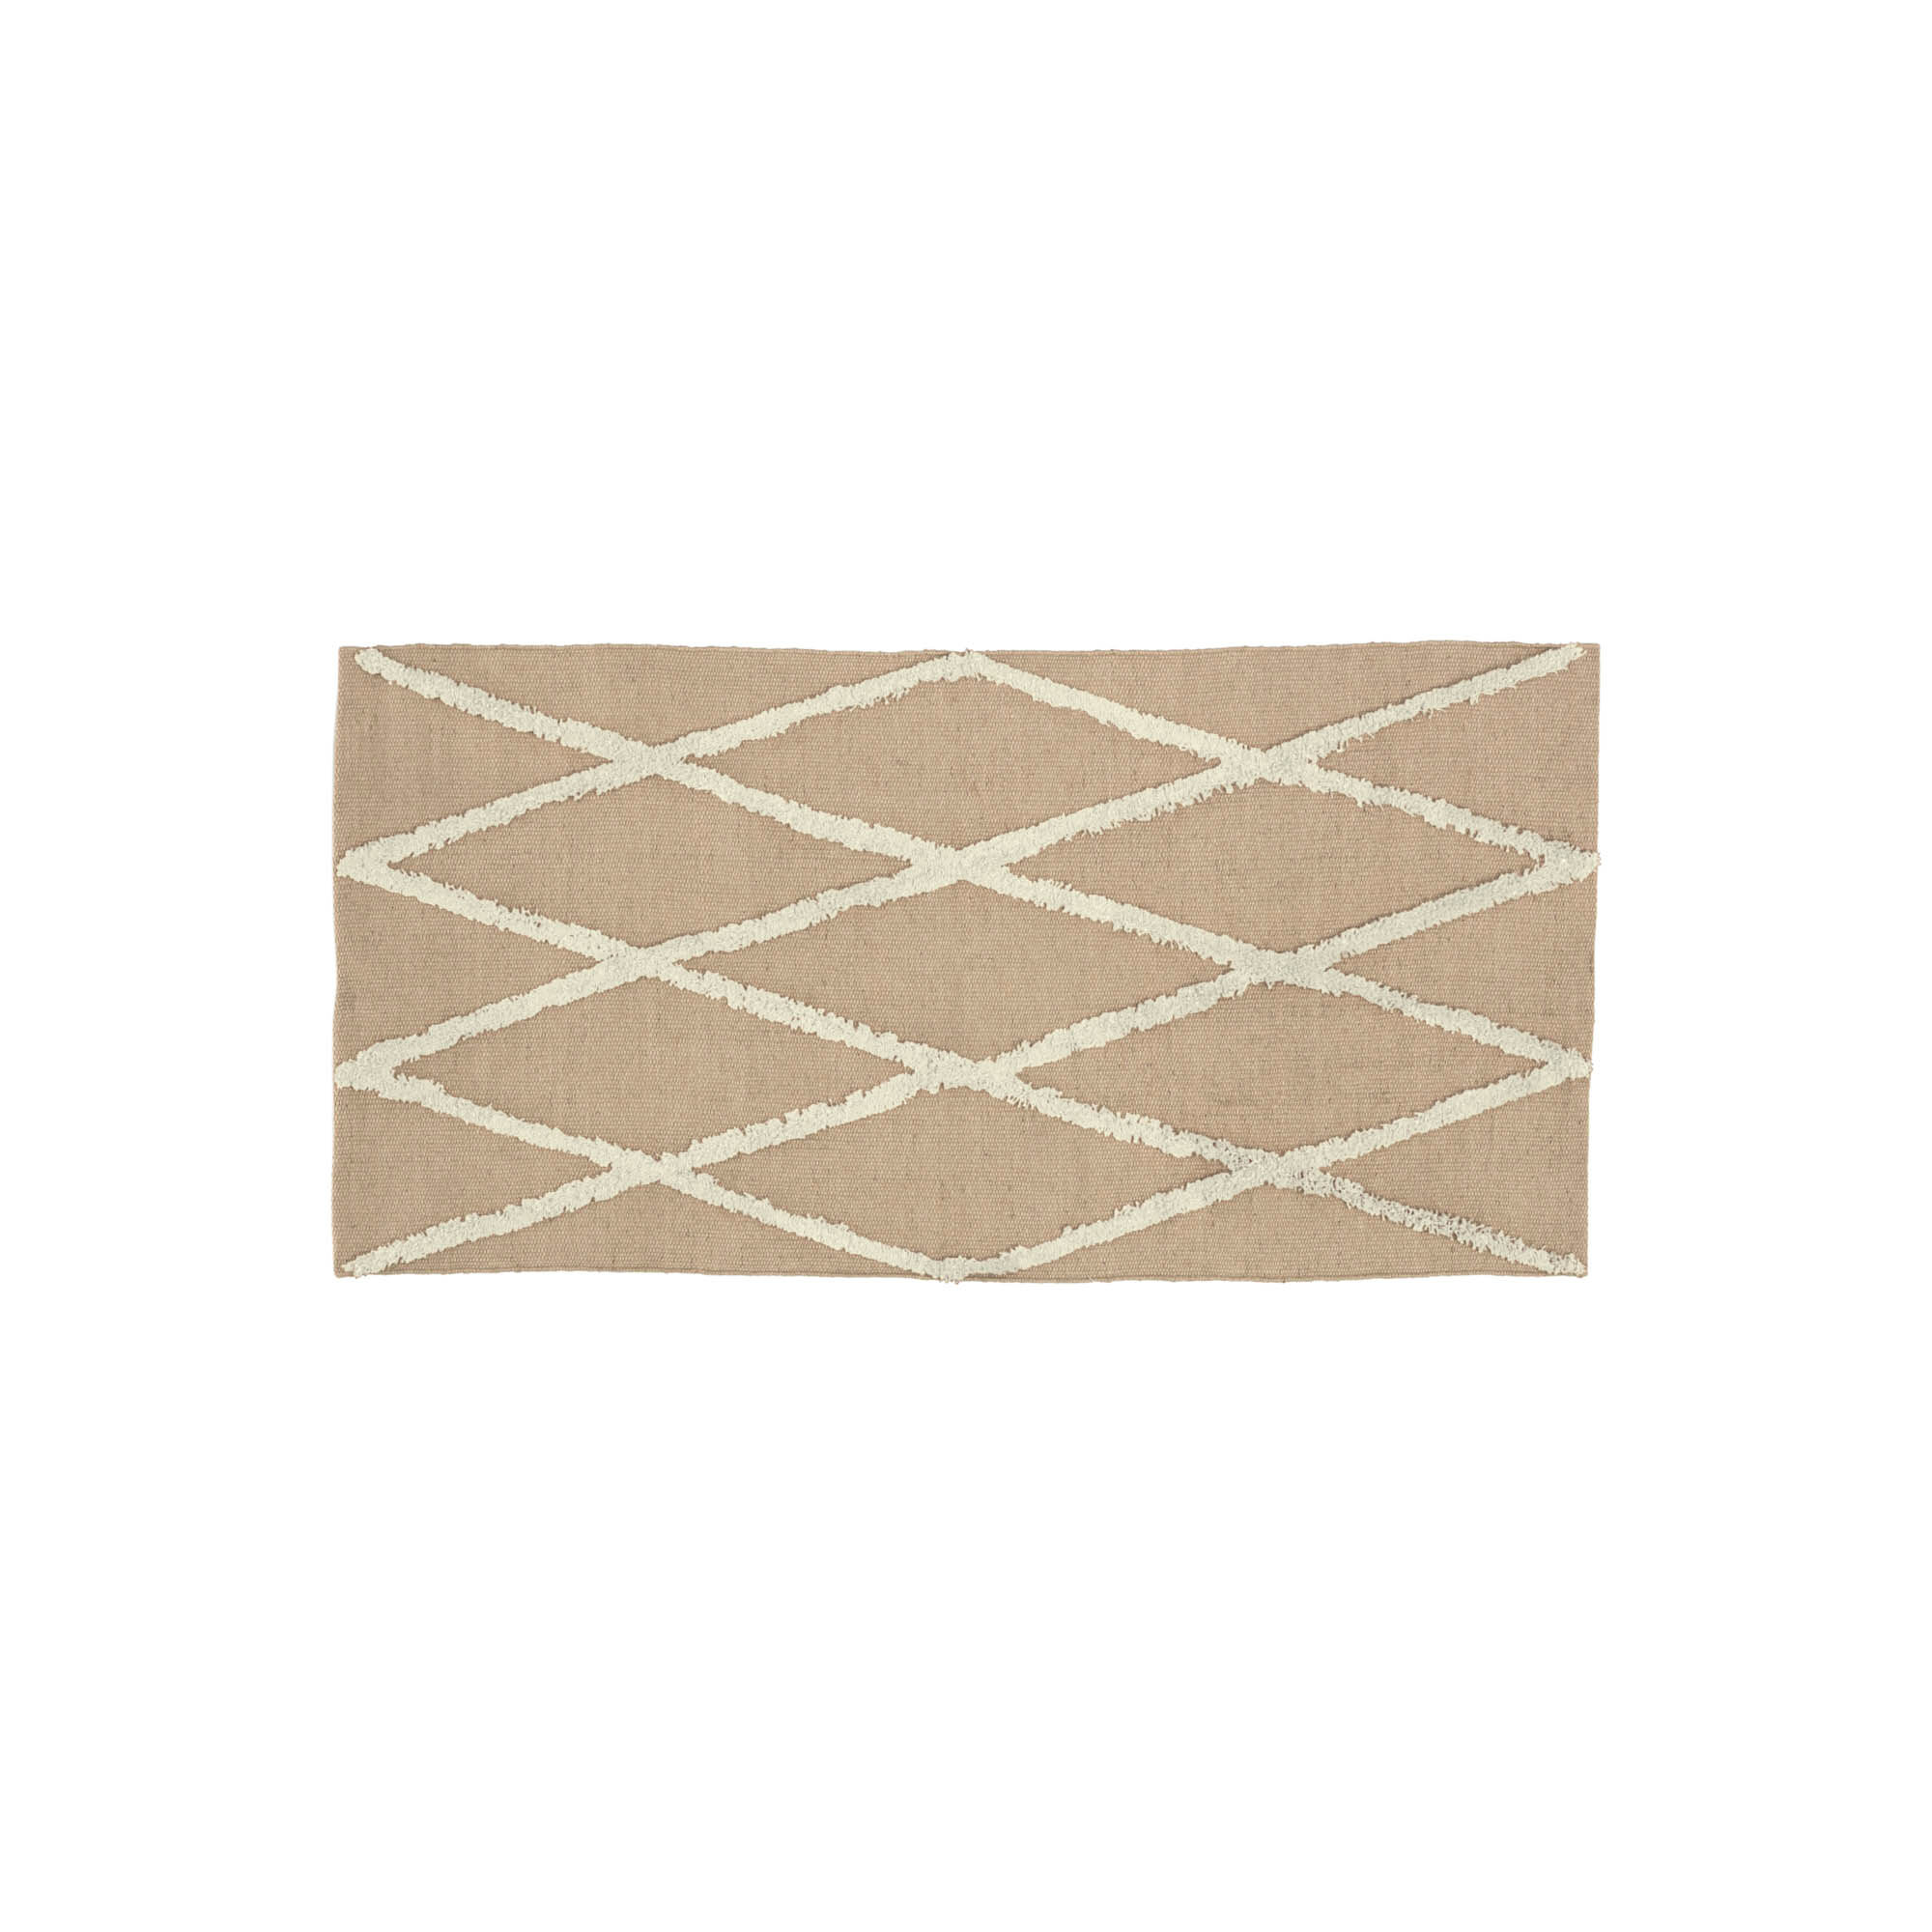 Kave Home Abena rug in natural and white jute and cotton rug 70 x 140 cm